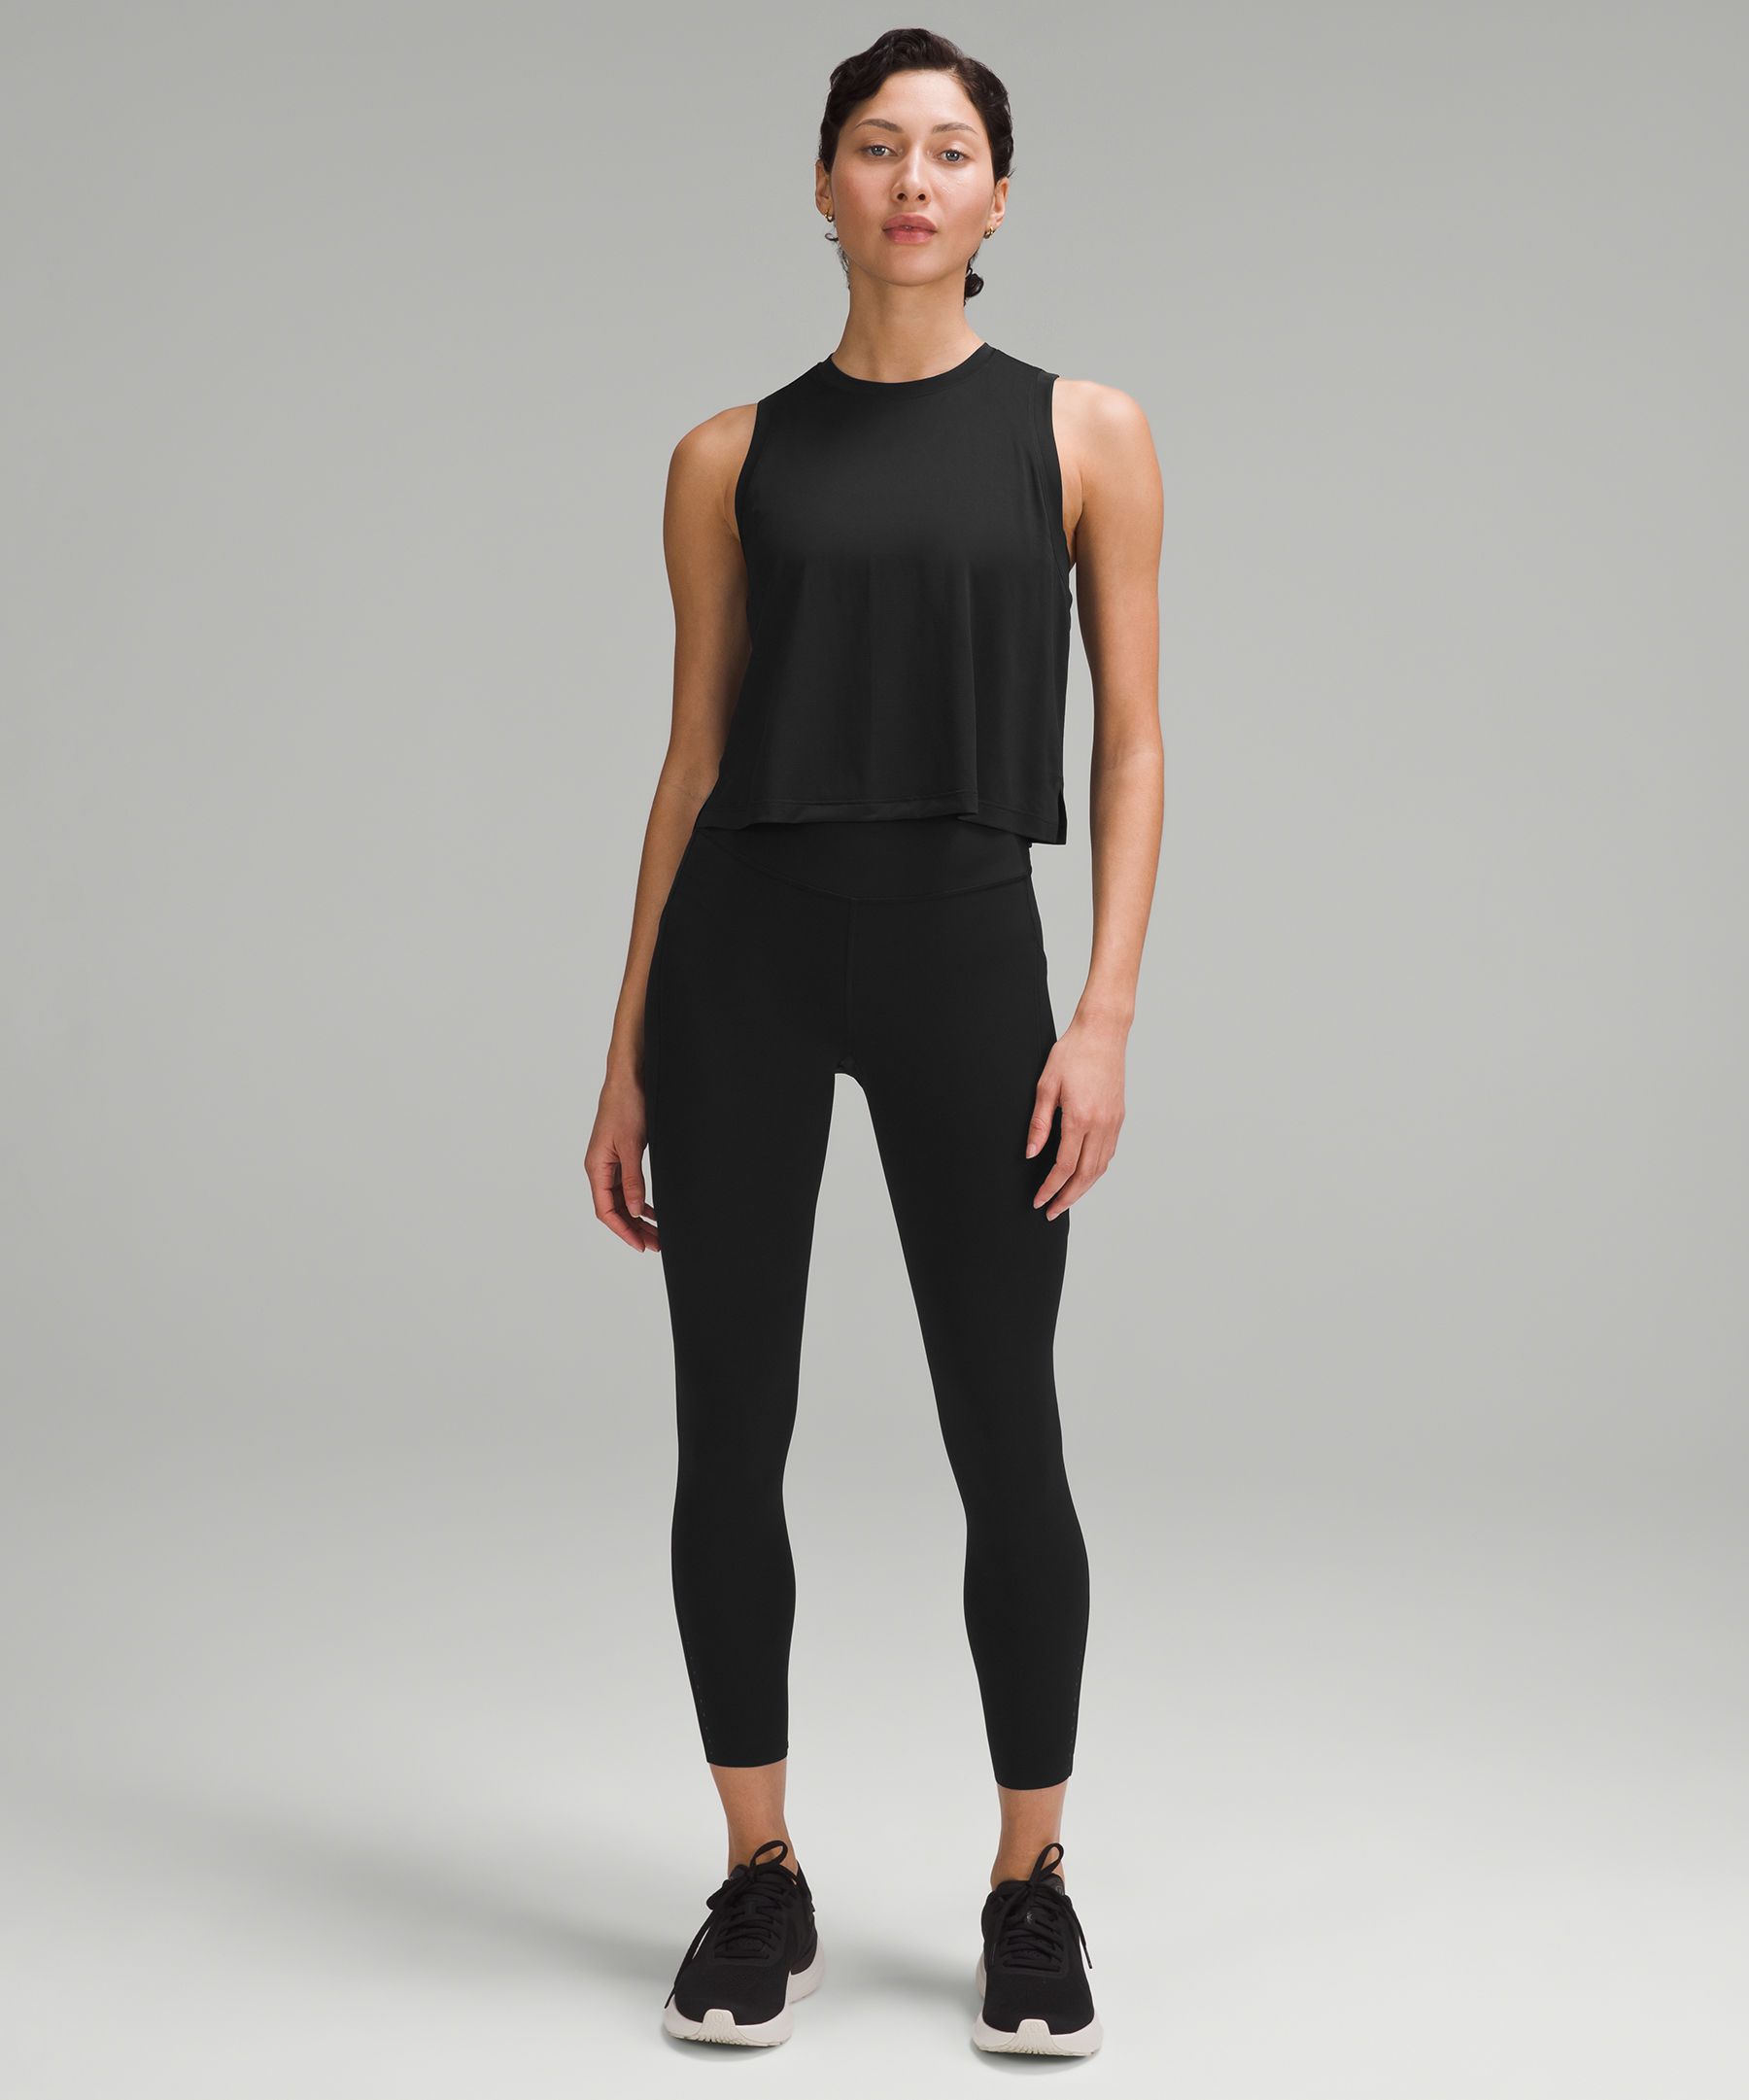 Fit session @lululemon 'must-haves' running edition Wearing: Speed